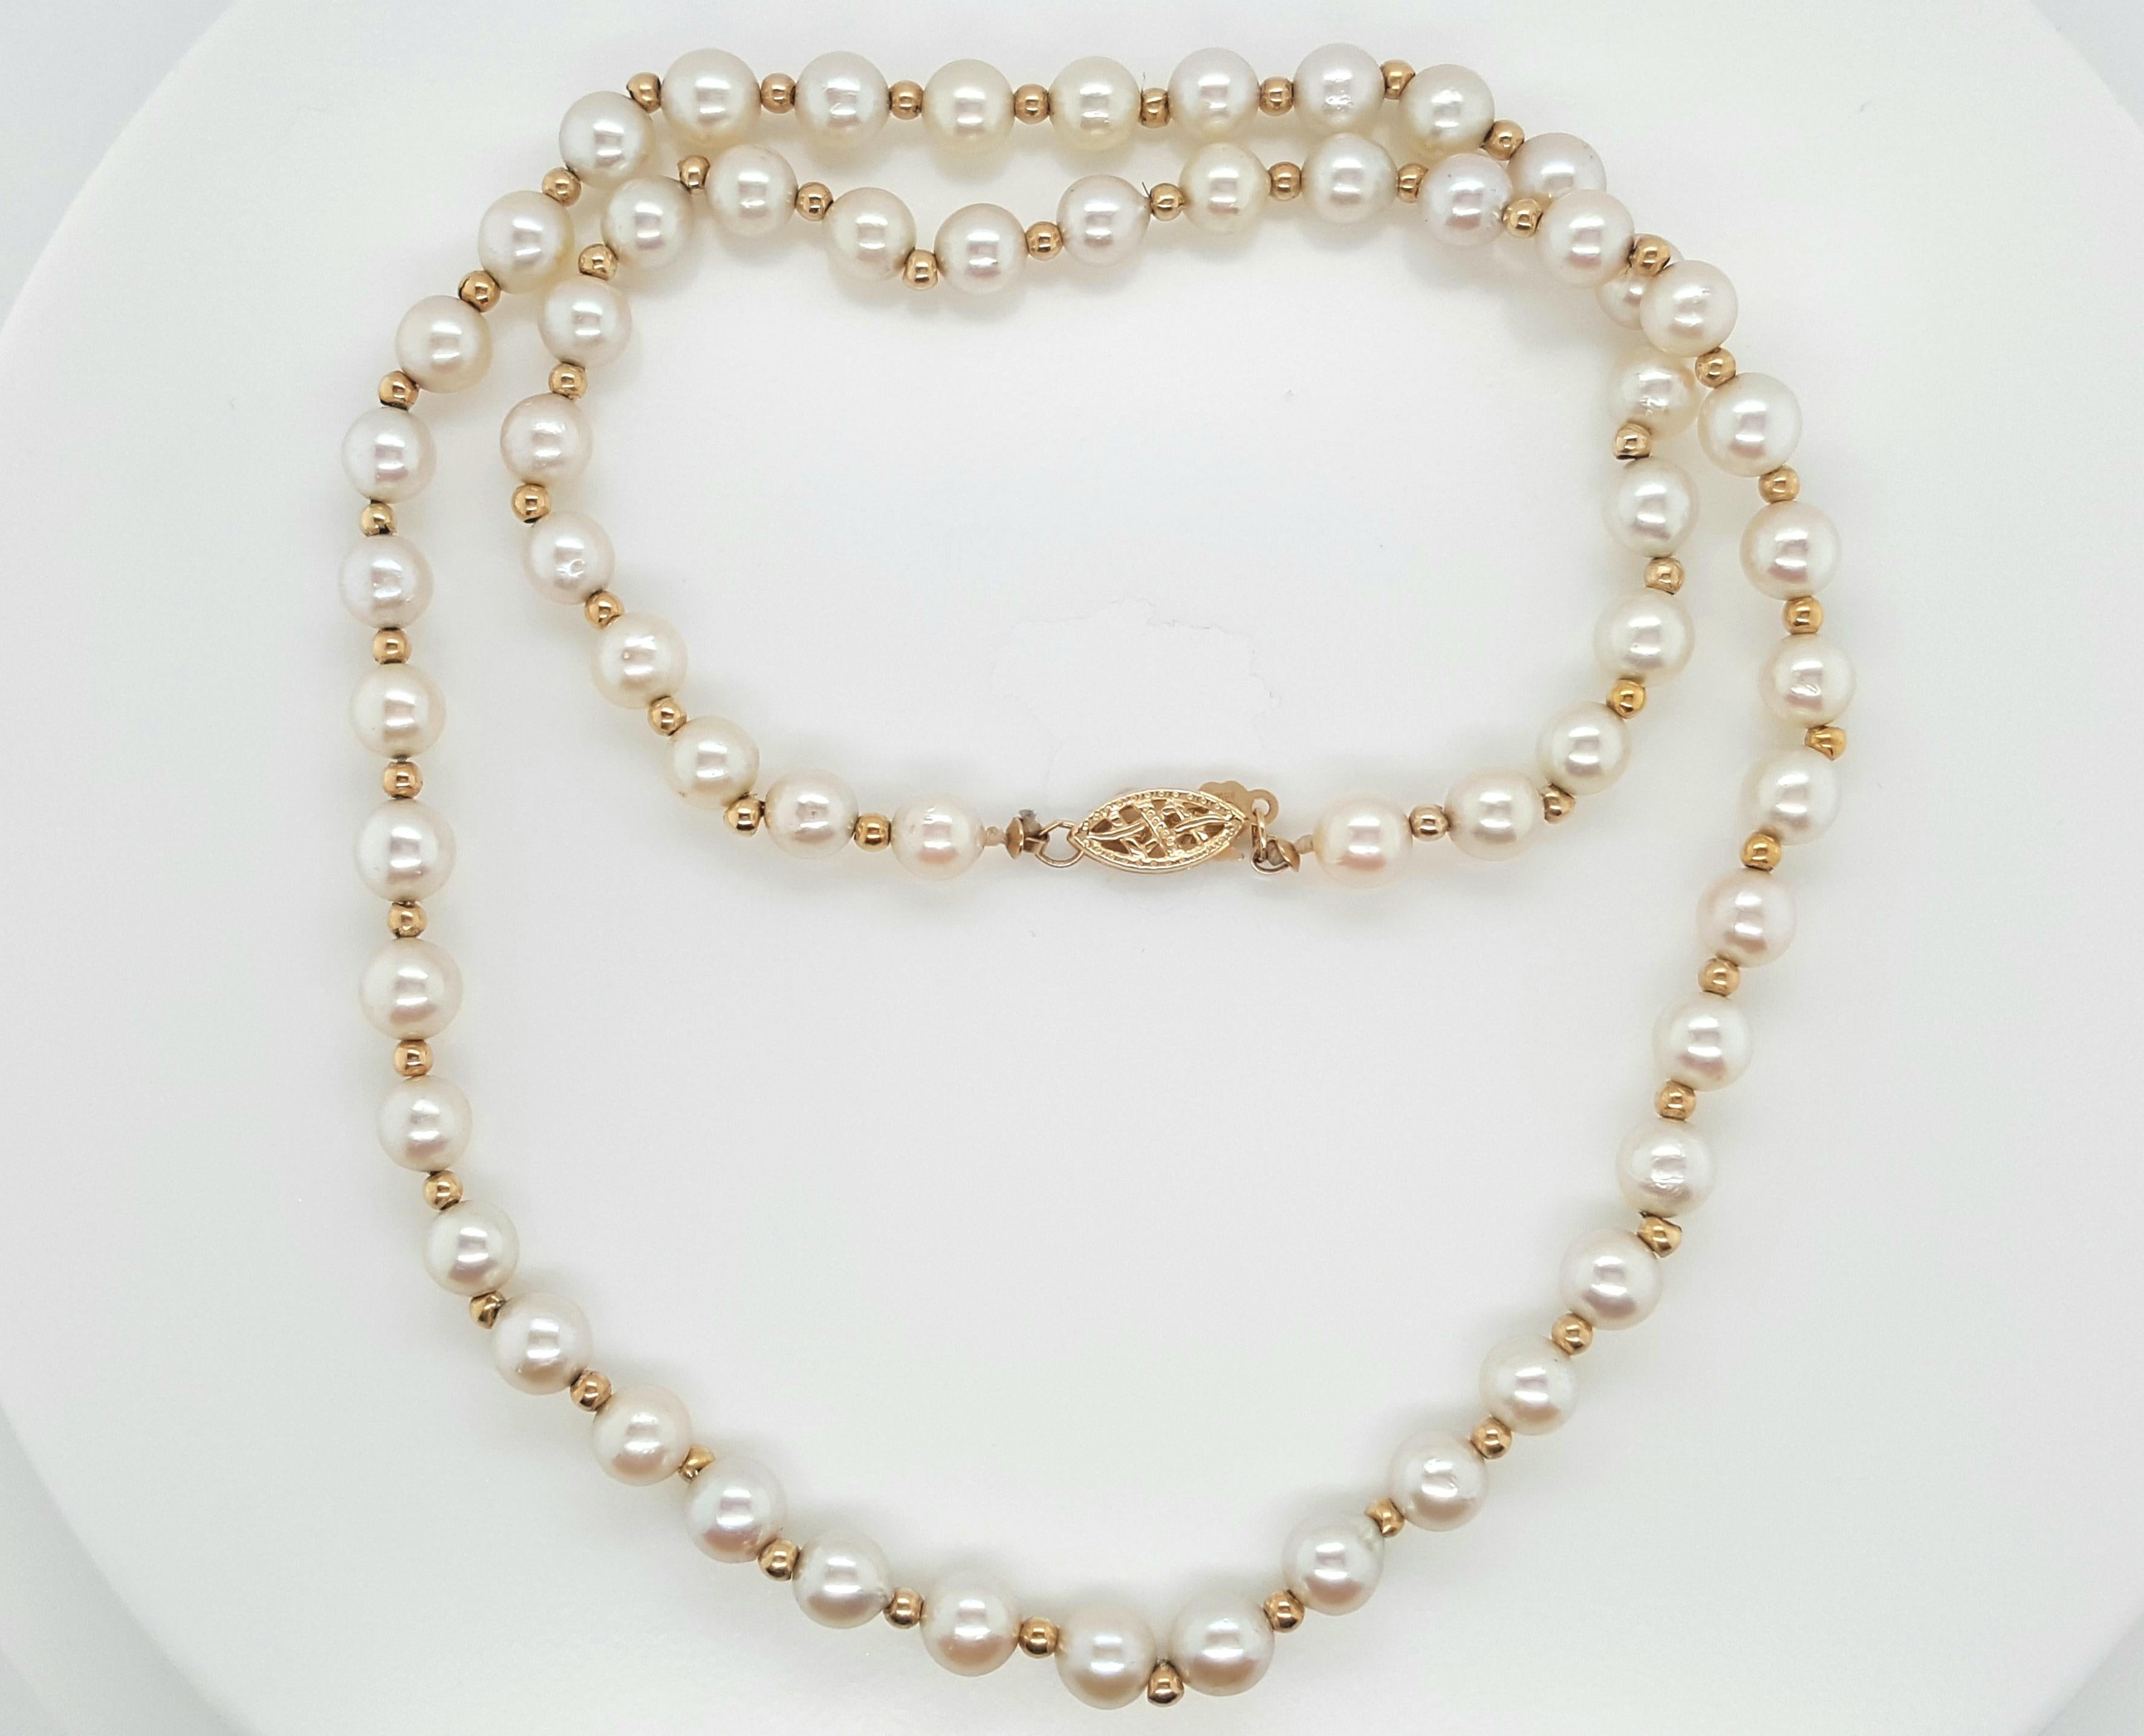 Women's or Men's Akoya Pearl Strand Accented by 14 Karat Yellow Gold Beads Necklace